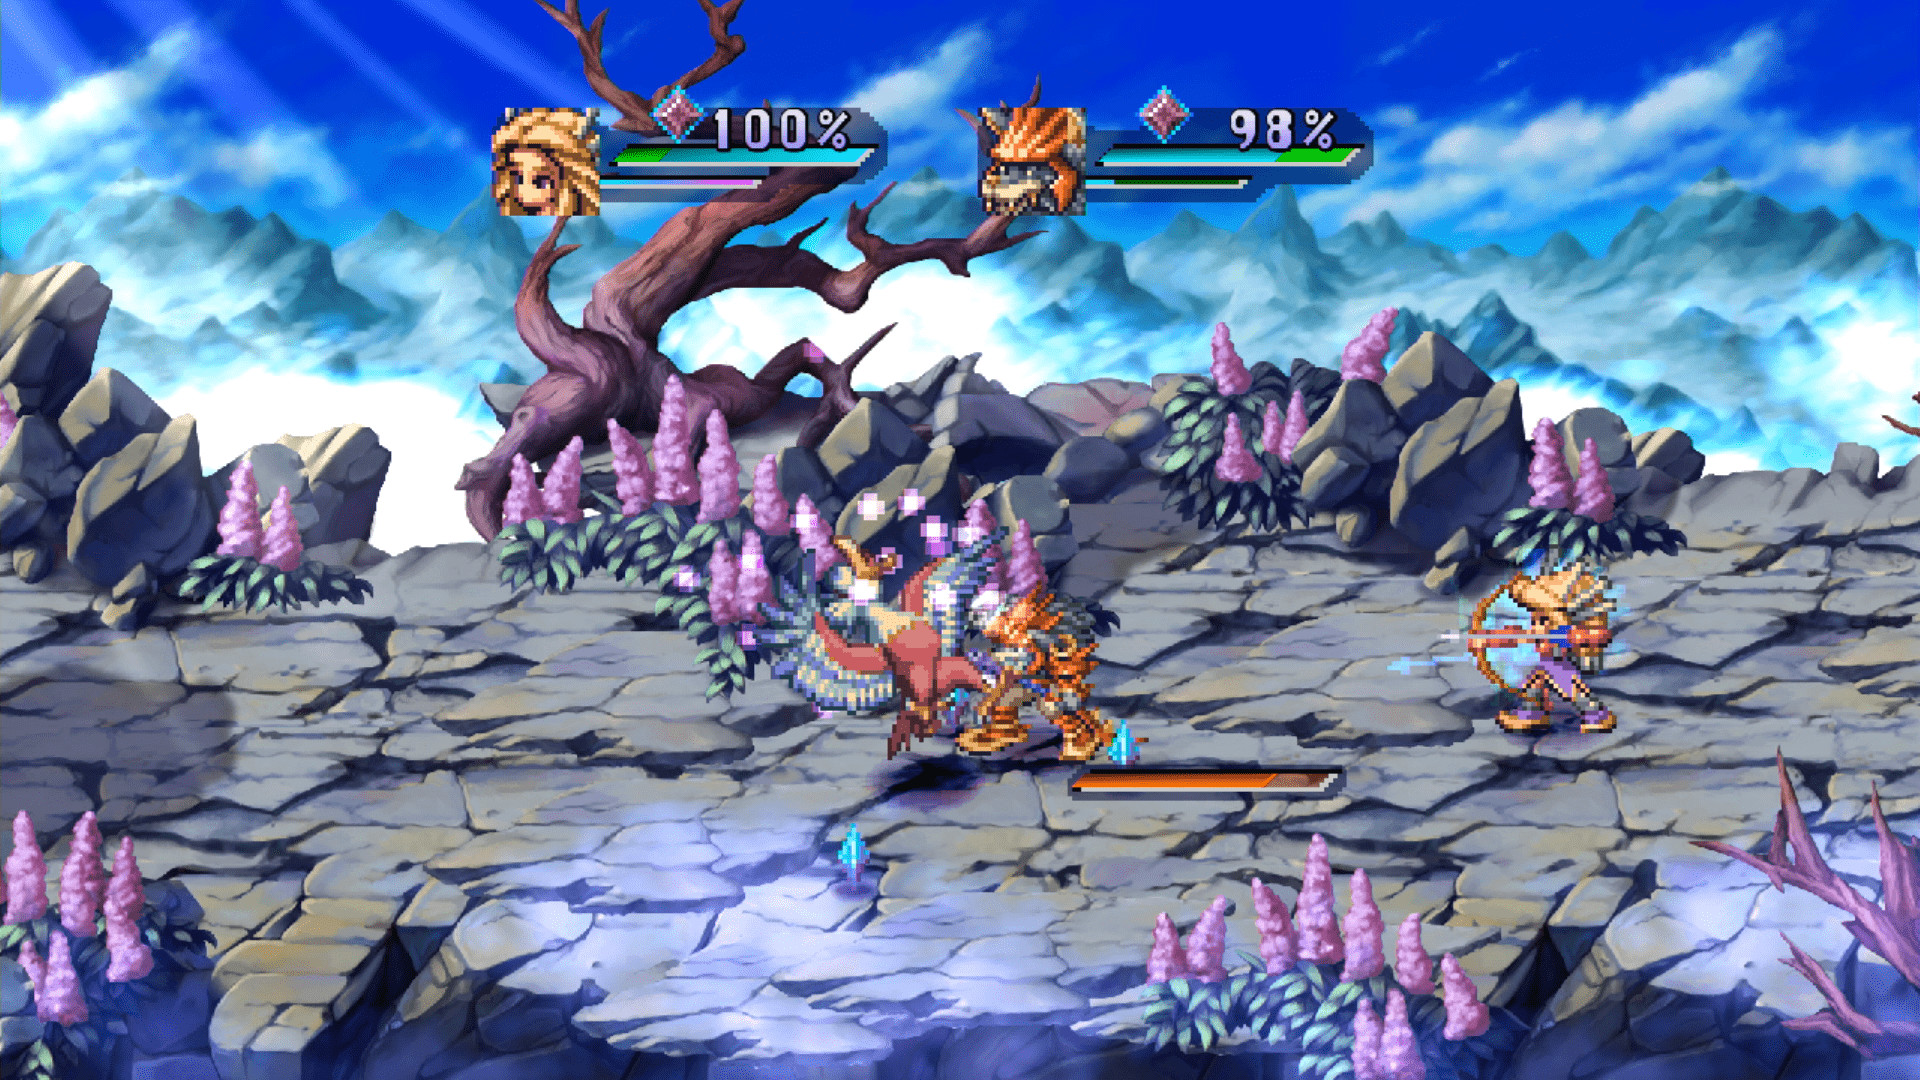 Find the best laptops for Legend of Mana